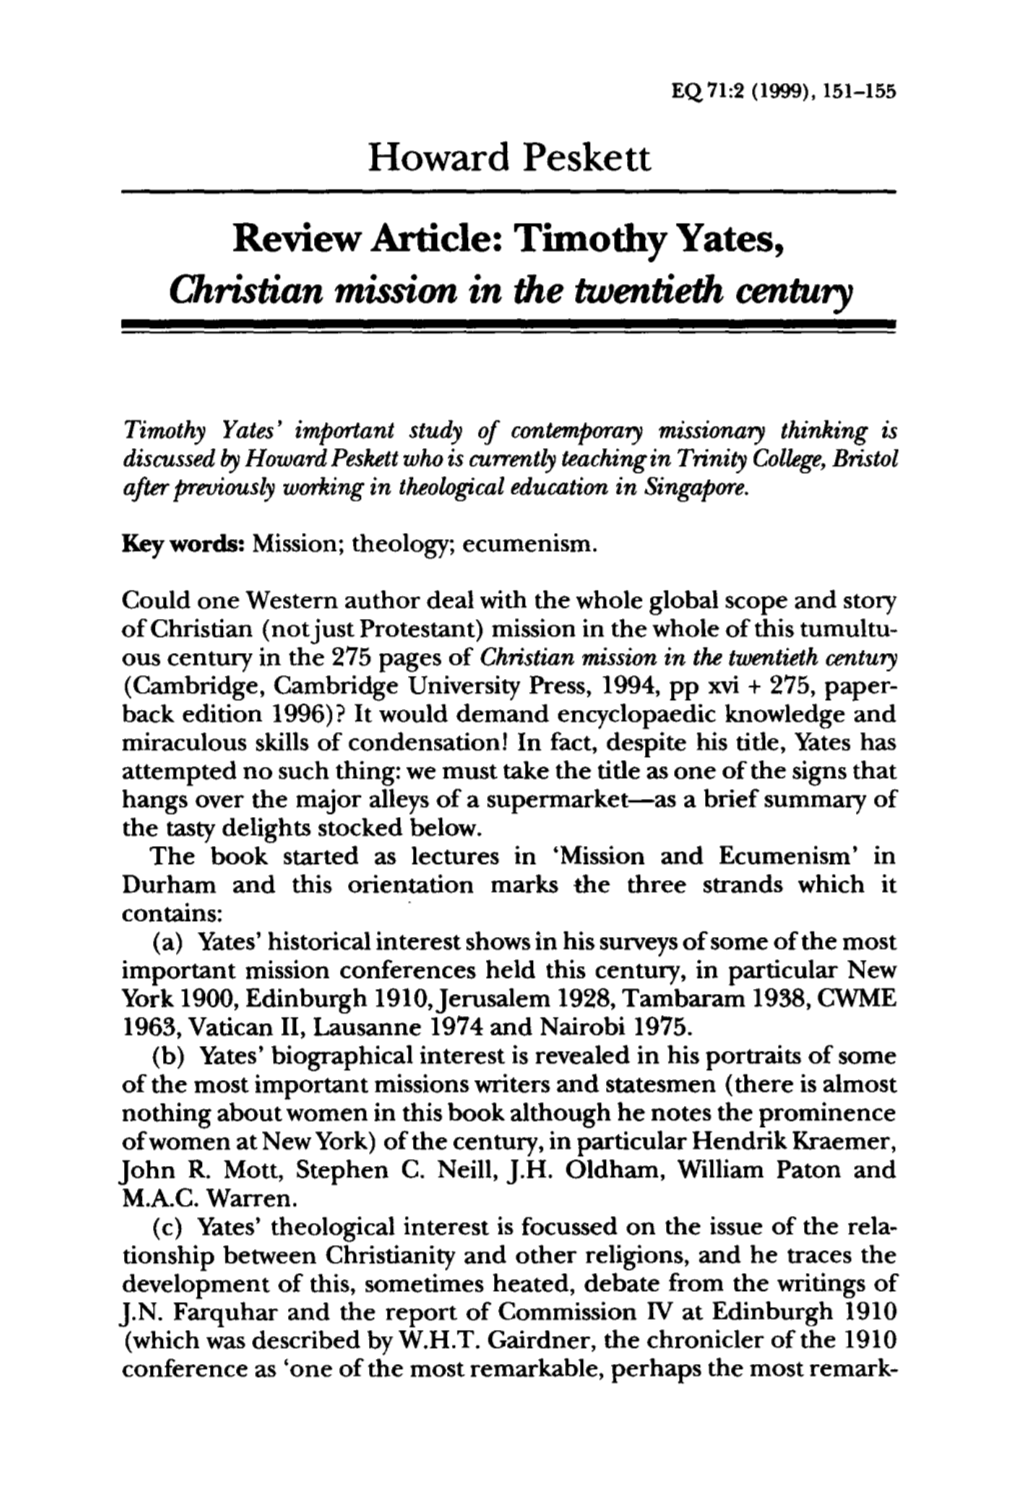 Howard Peskett, "Review Article: Timothy Yates, Christian Mission In